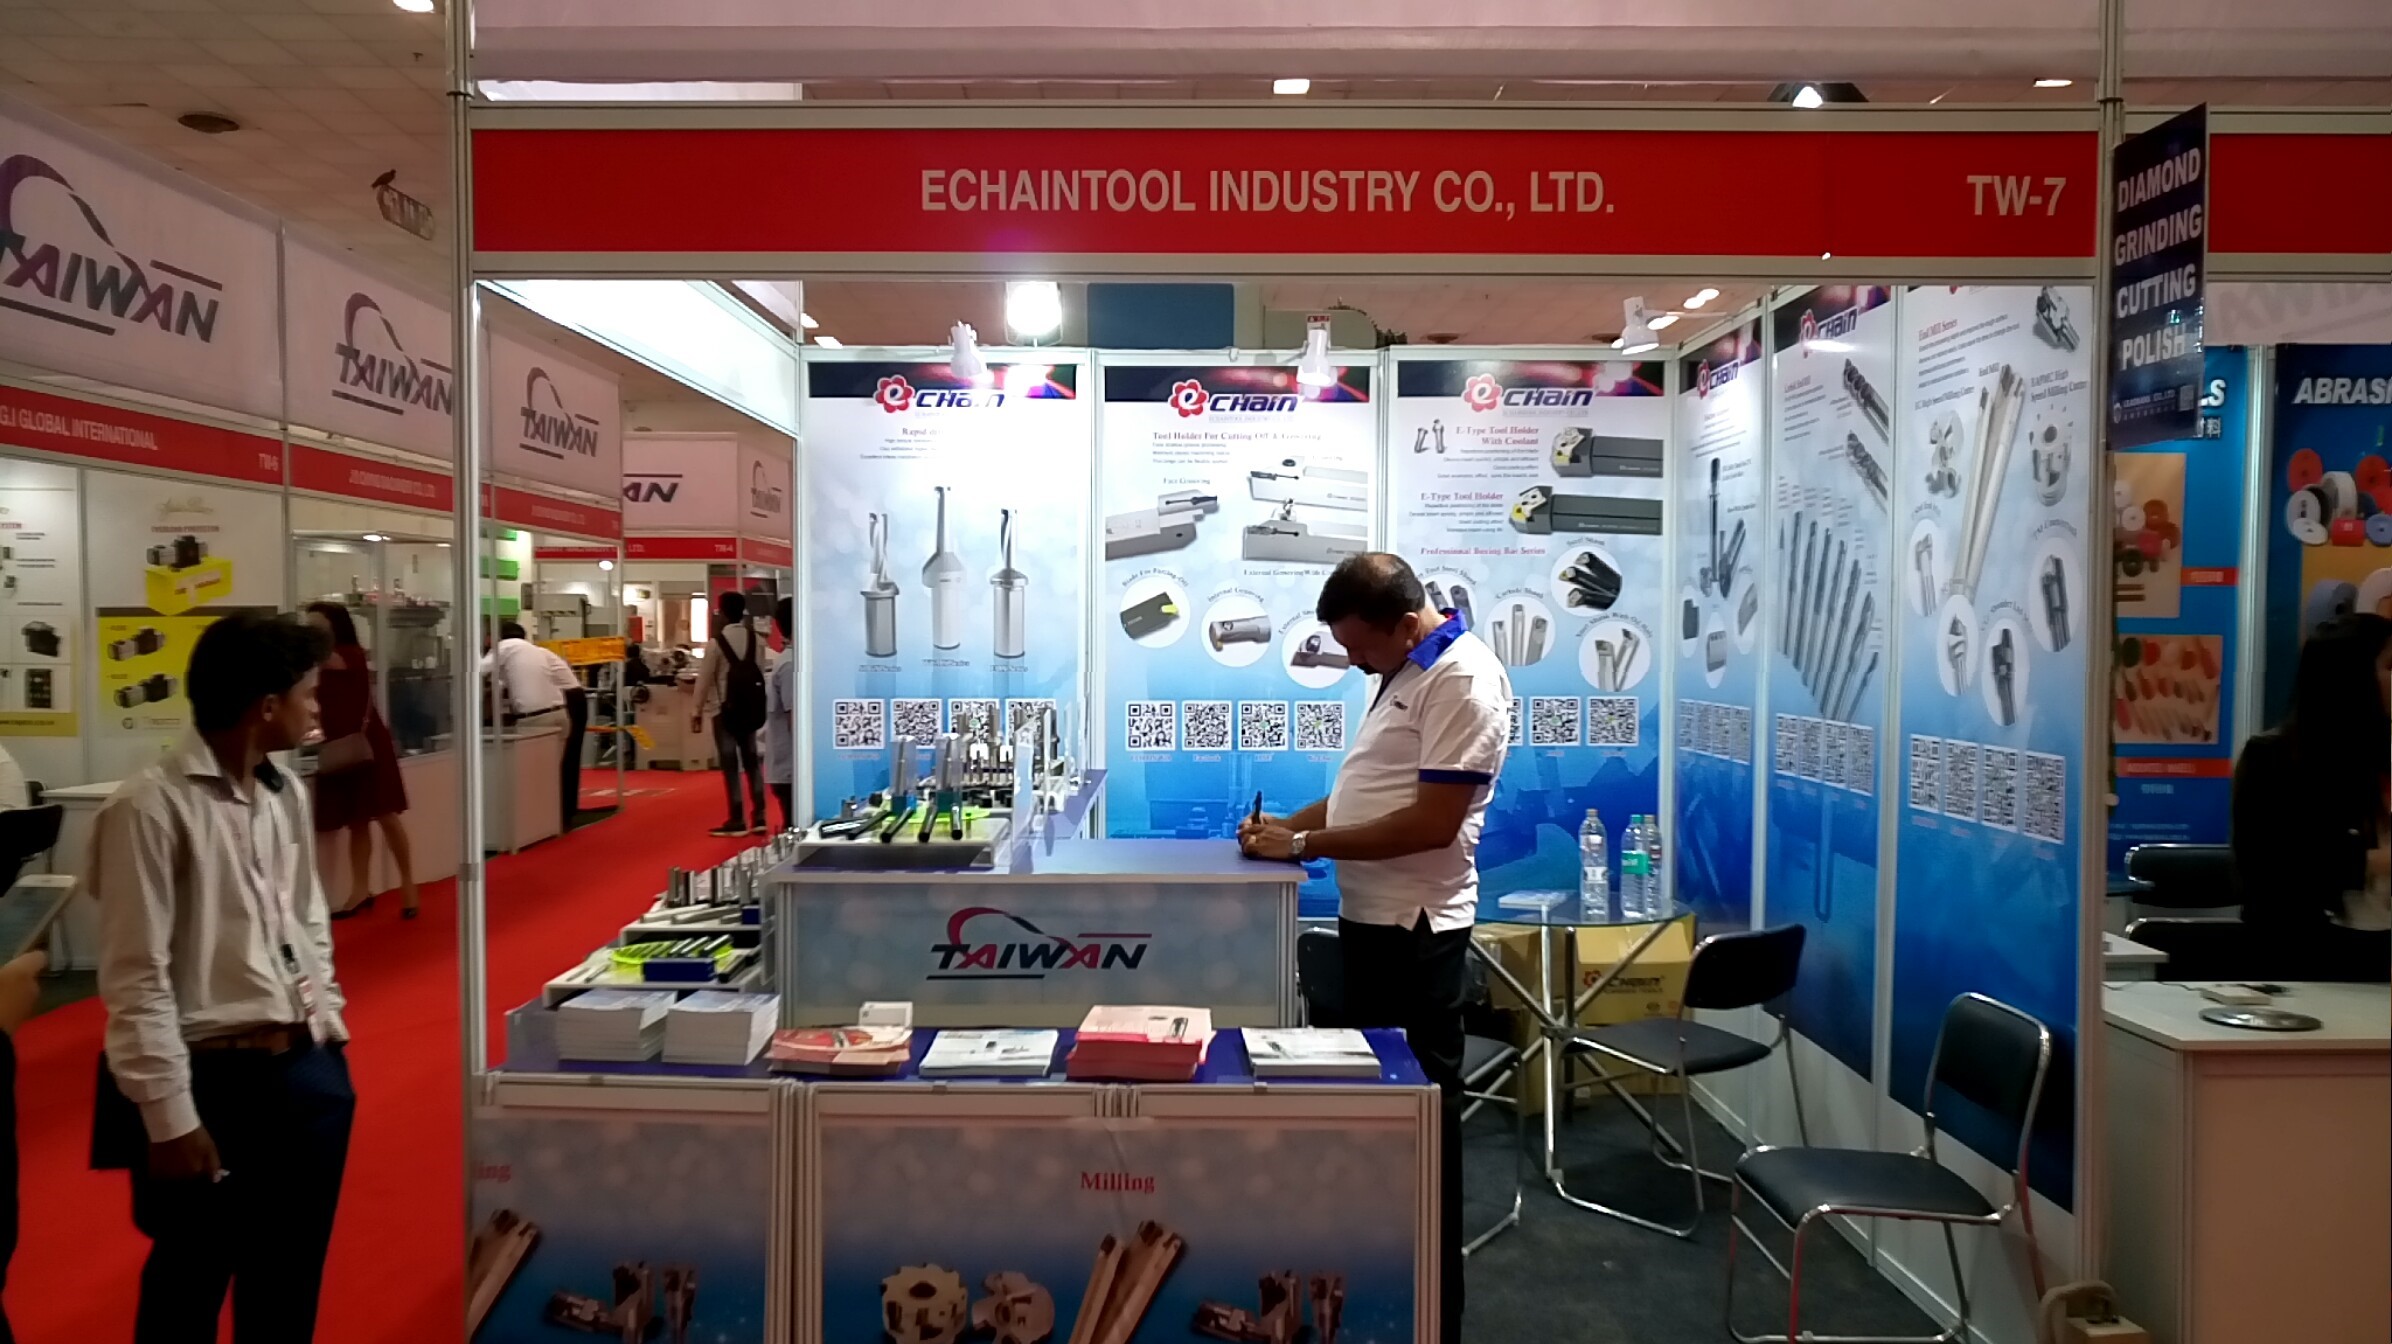 Echaintool Cutting tools in Taiwan at ACMEE 2018 in New Delhi